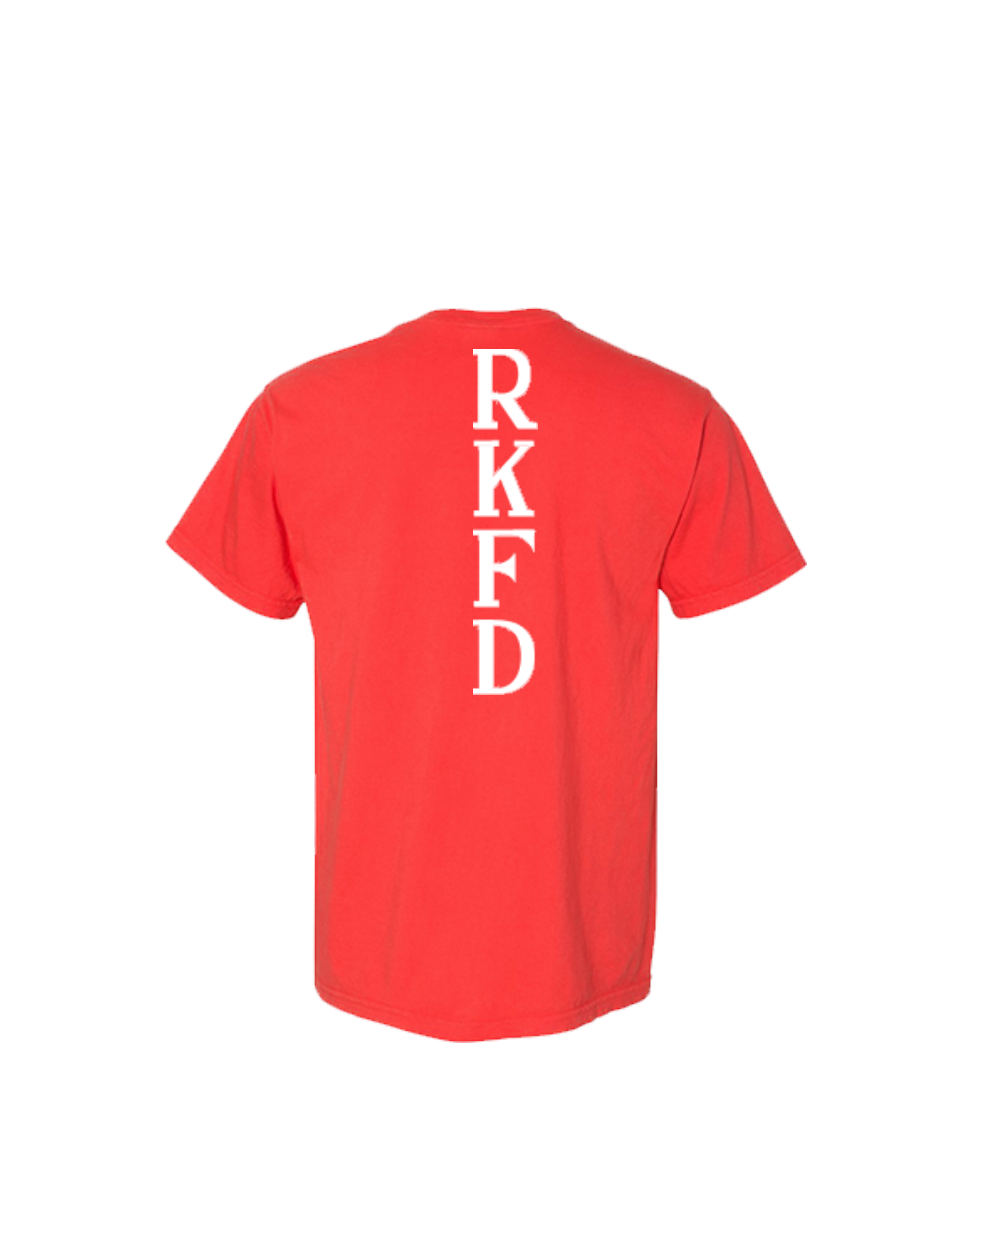 RKFD Champs Tee (red)